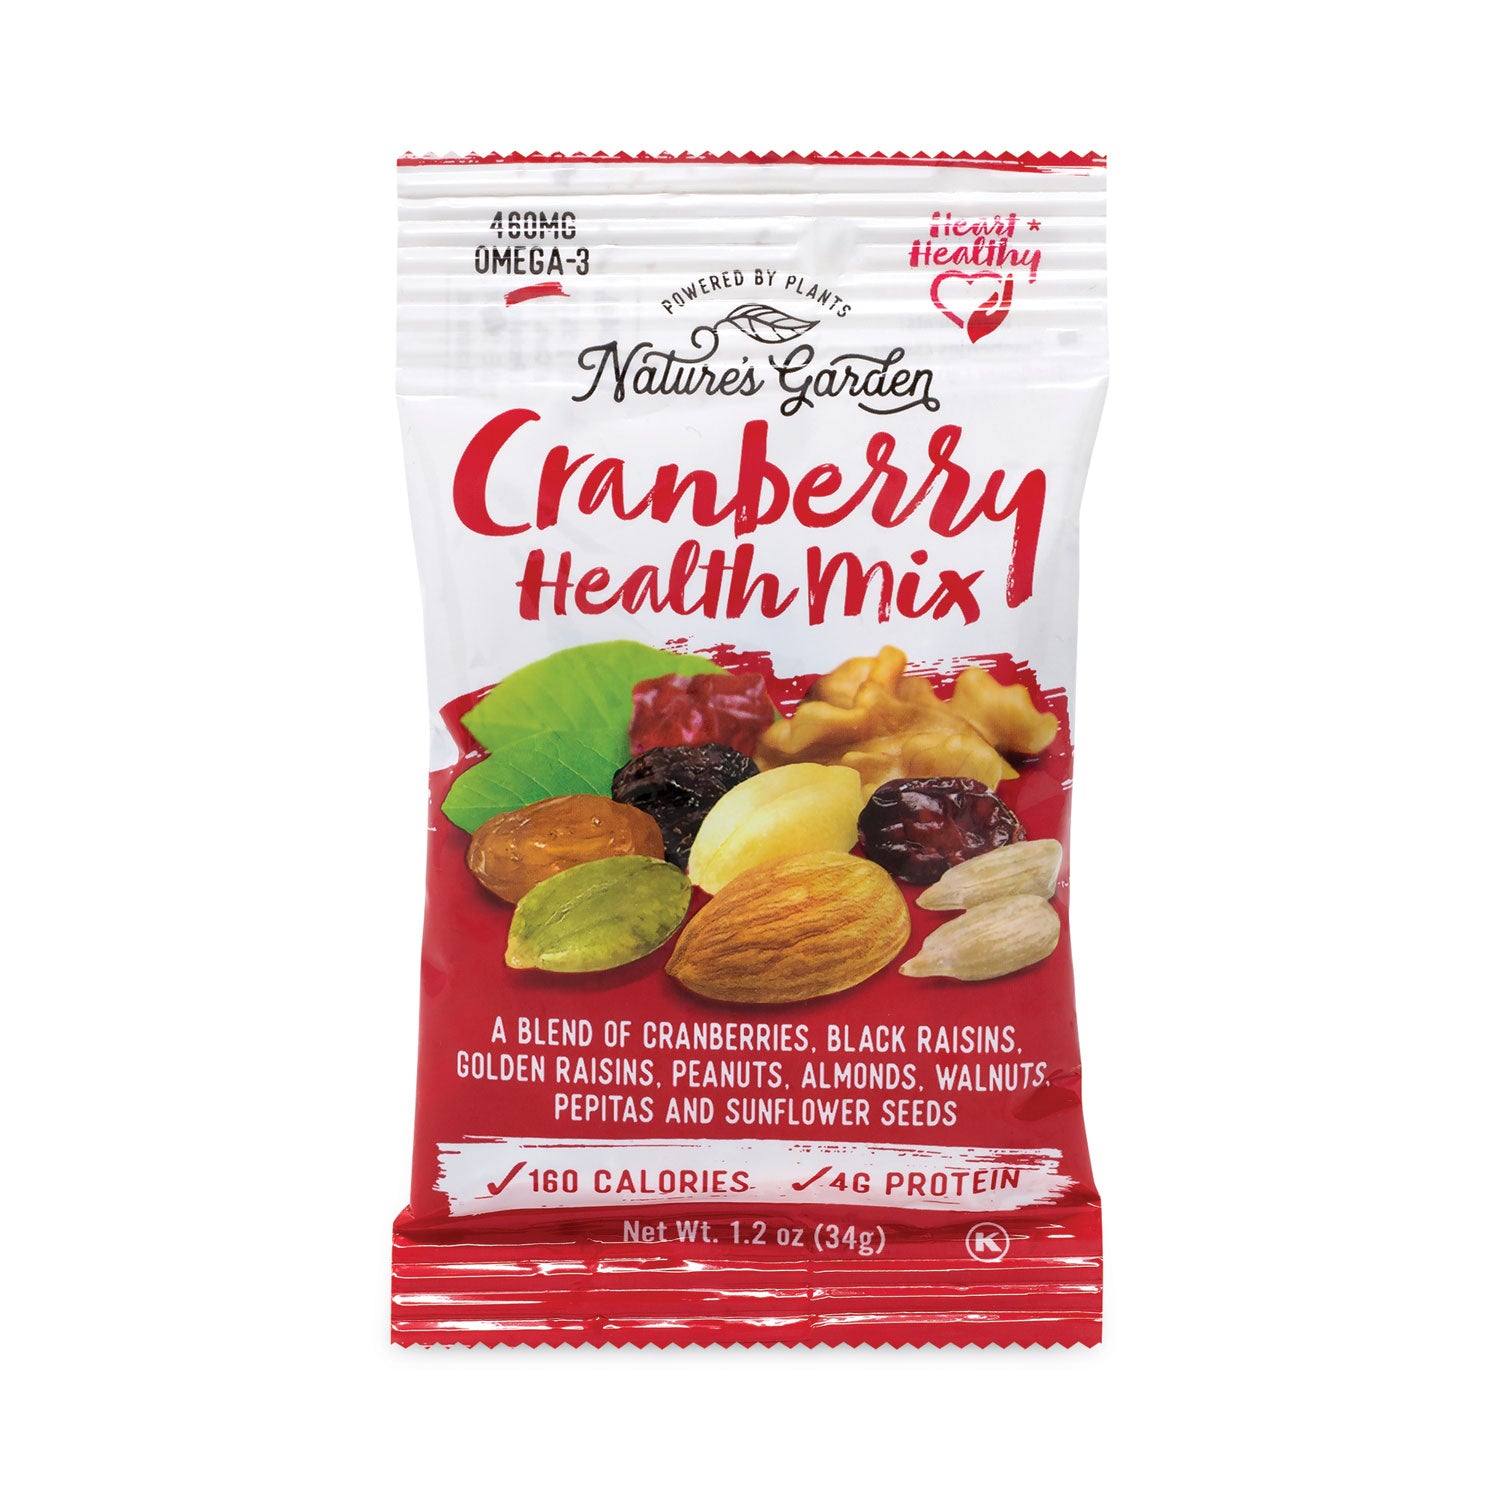 cranberry-health-mix-12-oz-pouch-6-pouches-pack-ships-in-1-3-business-days_grr29400005 - 1